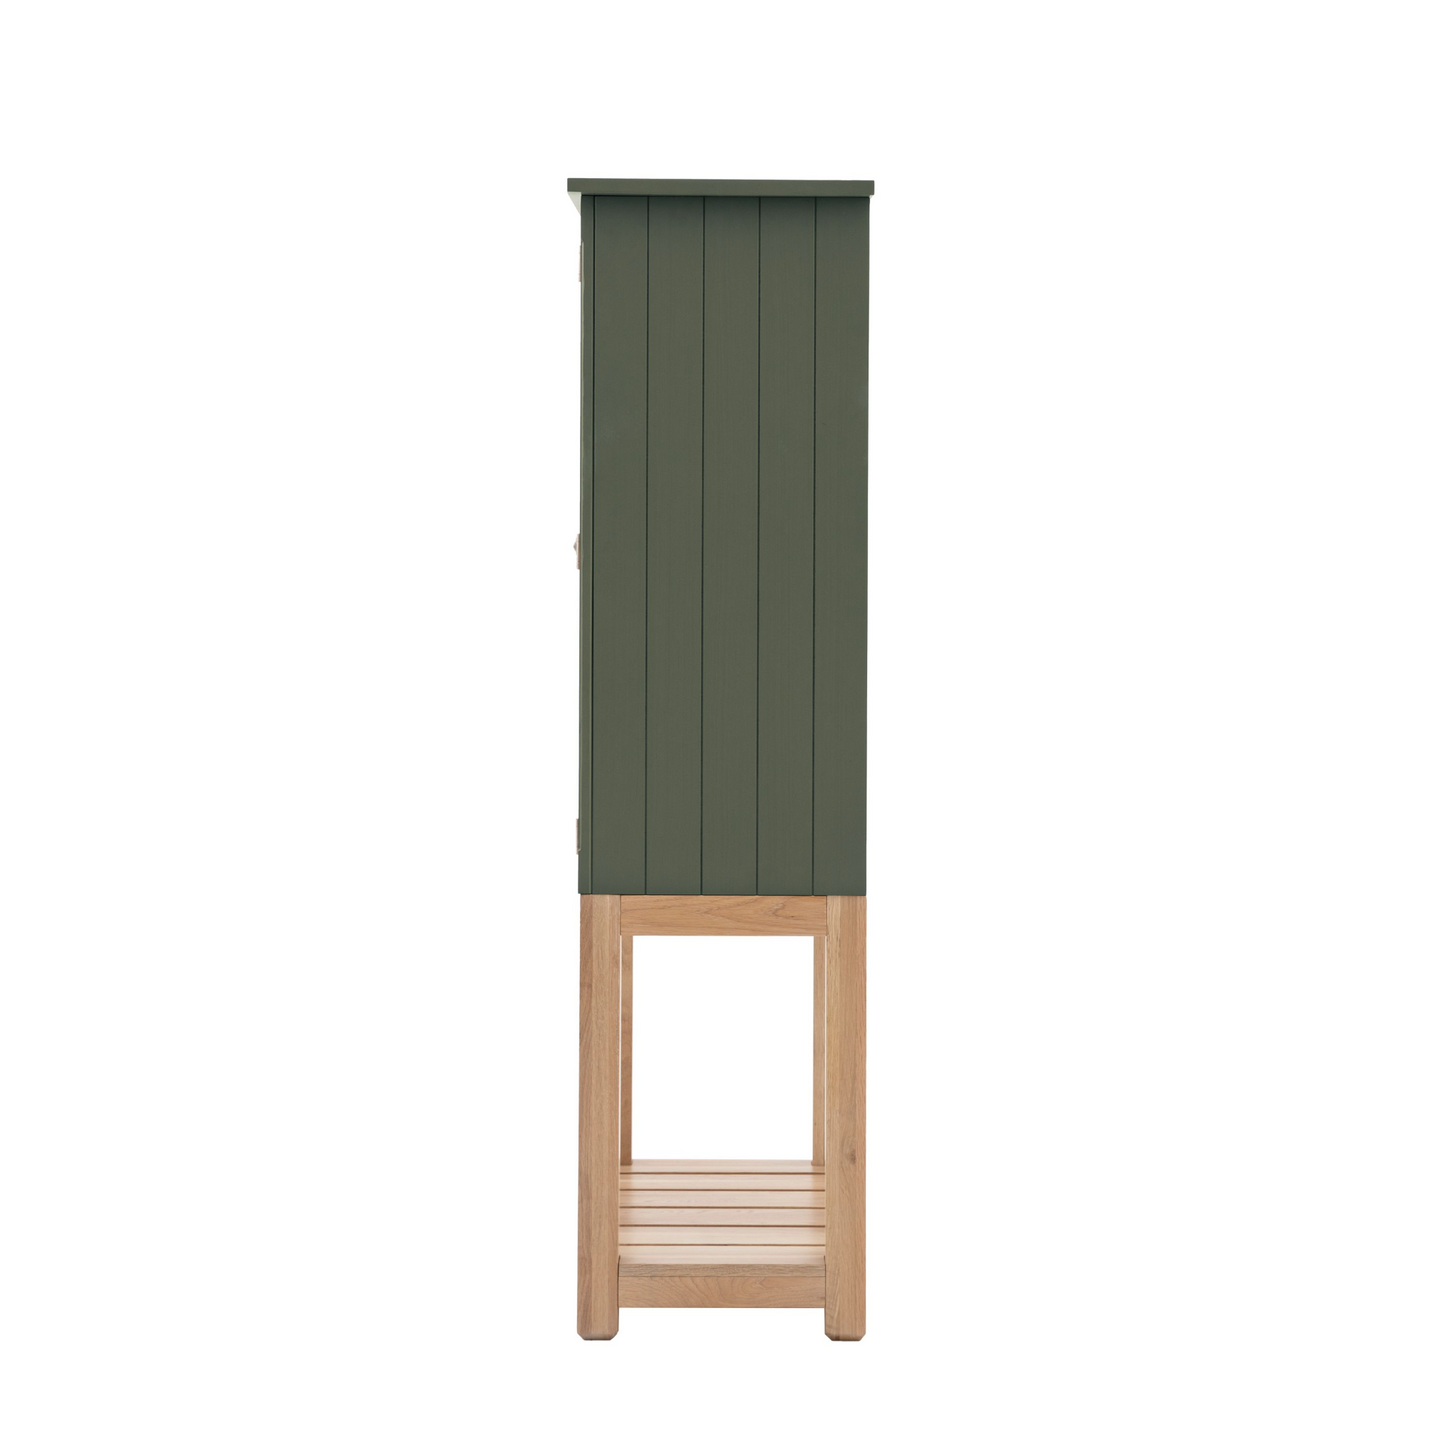 A Moss-colored Buckland 2 Door Storage Cupboard (w)900x(d)450x(h)1700mm with a wooden shelf, perfect for home furniture and interior decor.